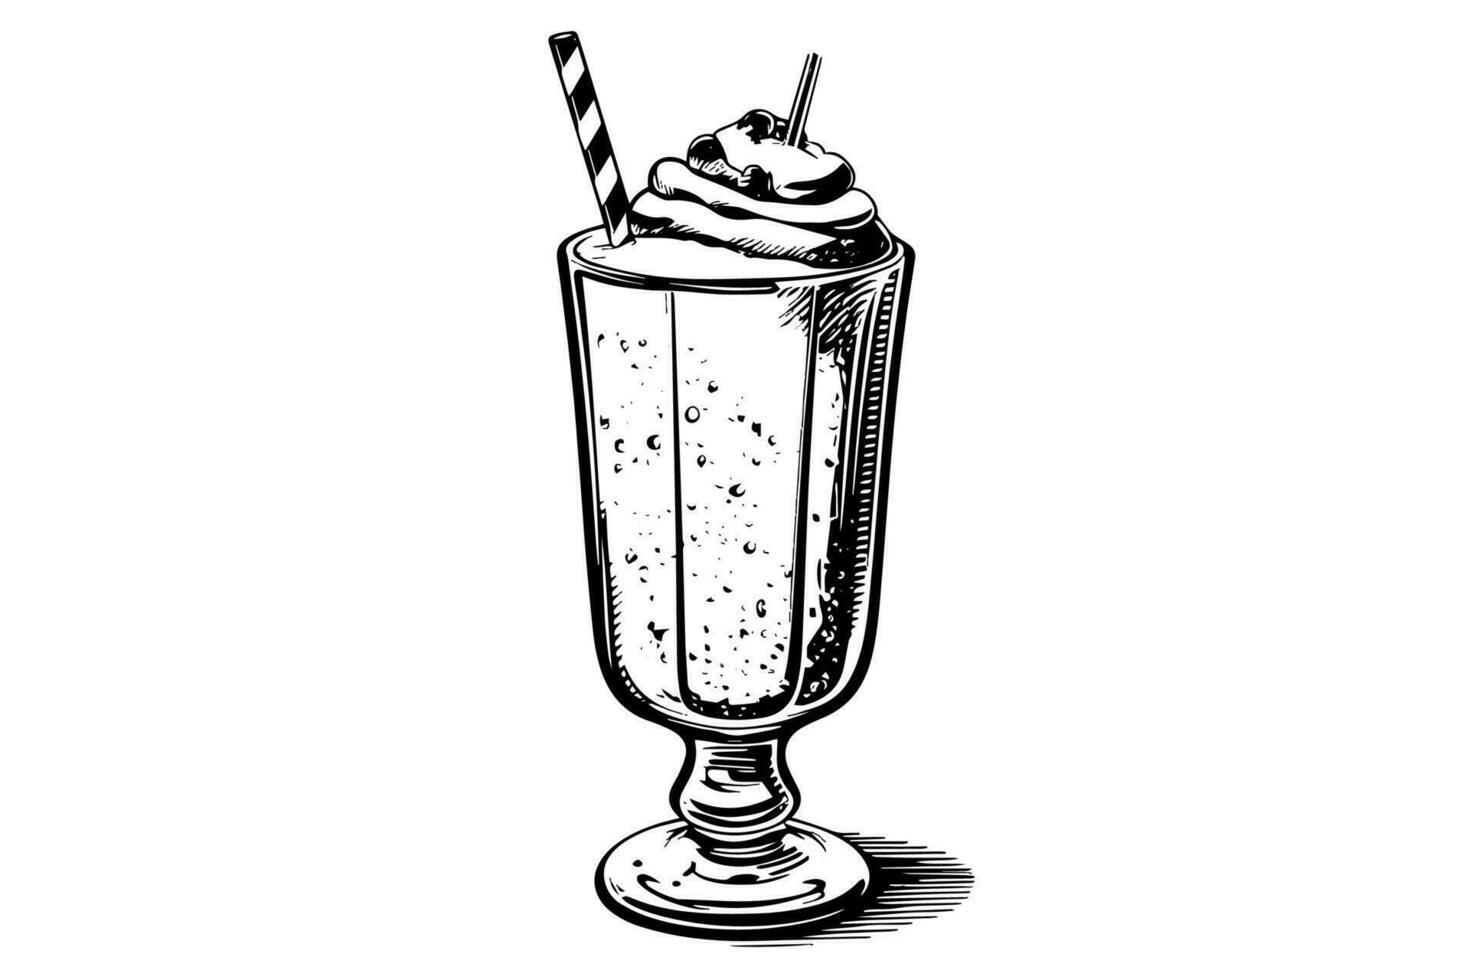 Chocolate milk shake sketch engraving vector illustration. Black and white isolated composition.